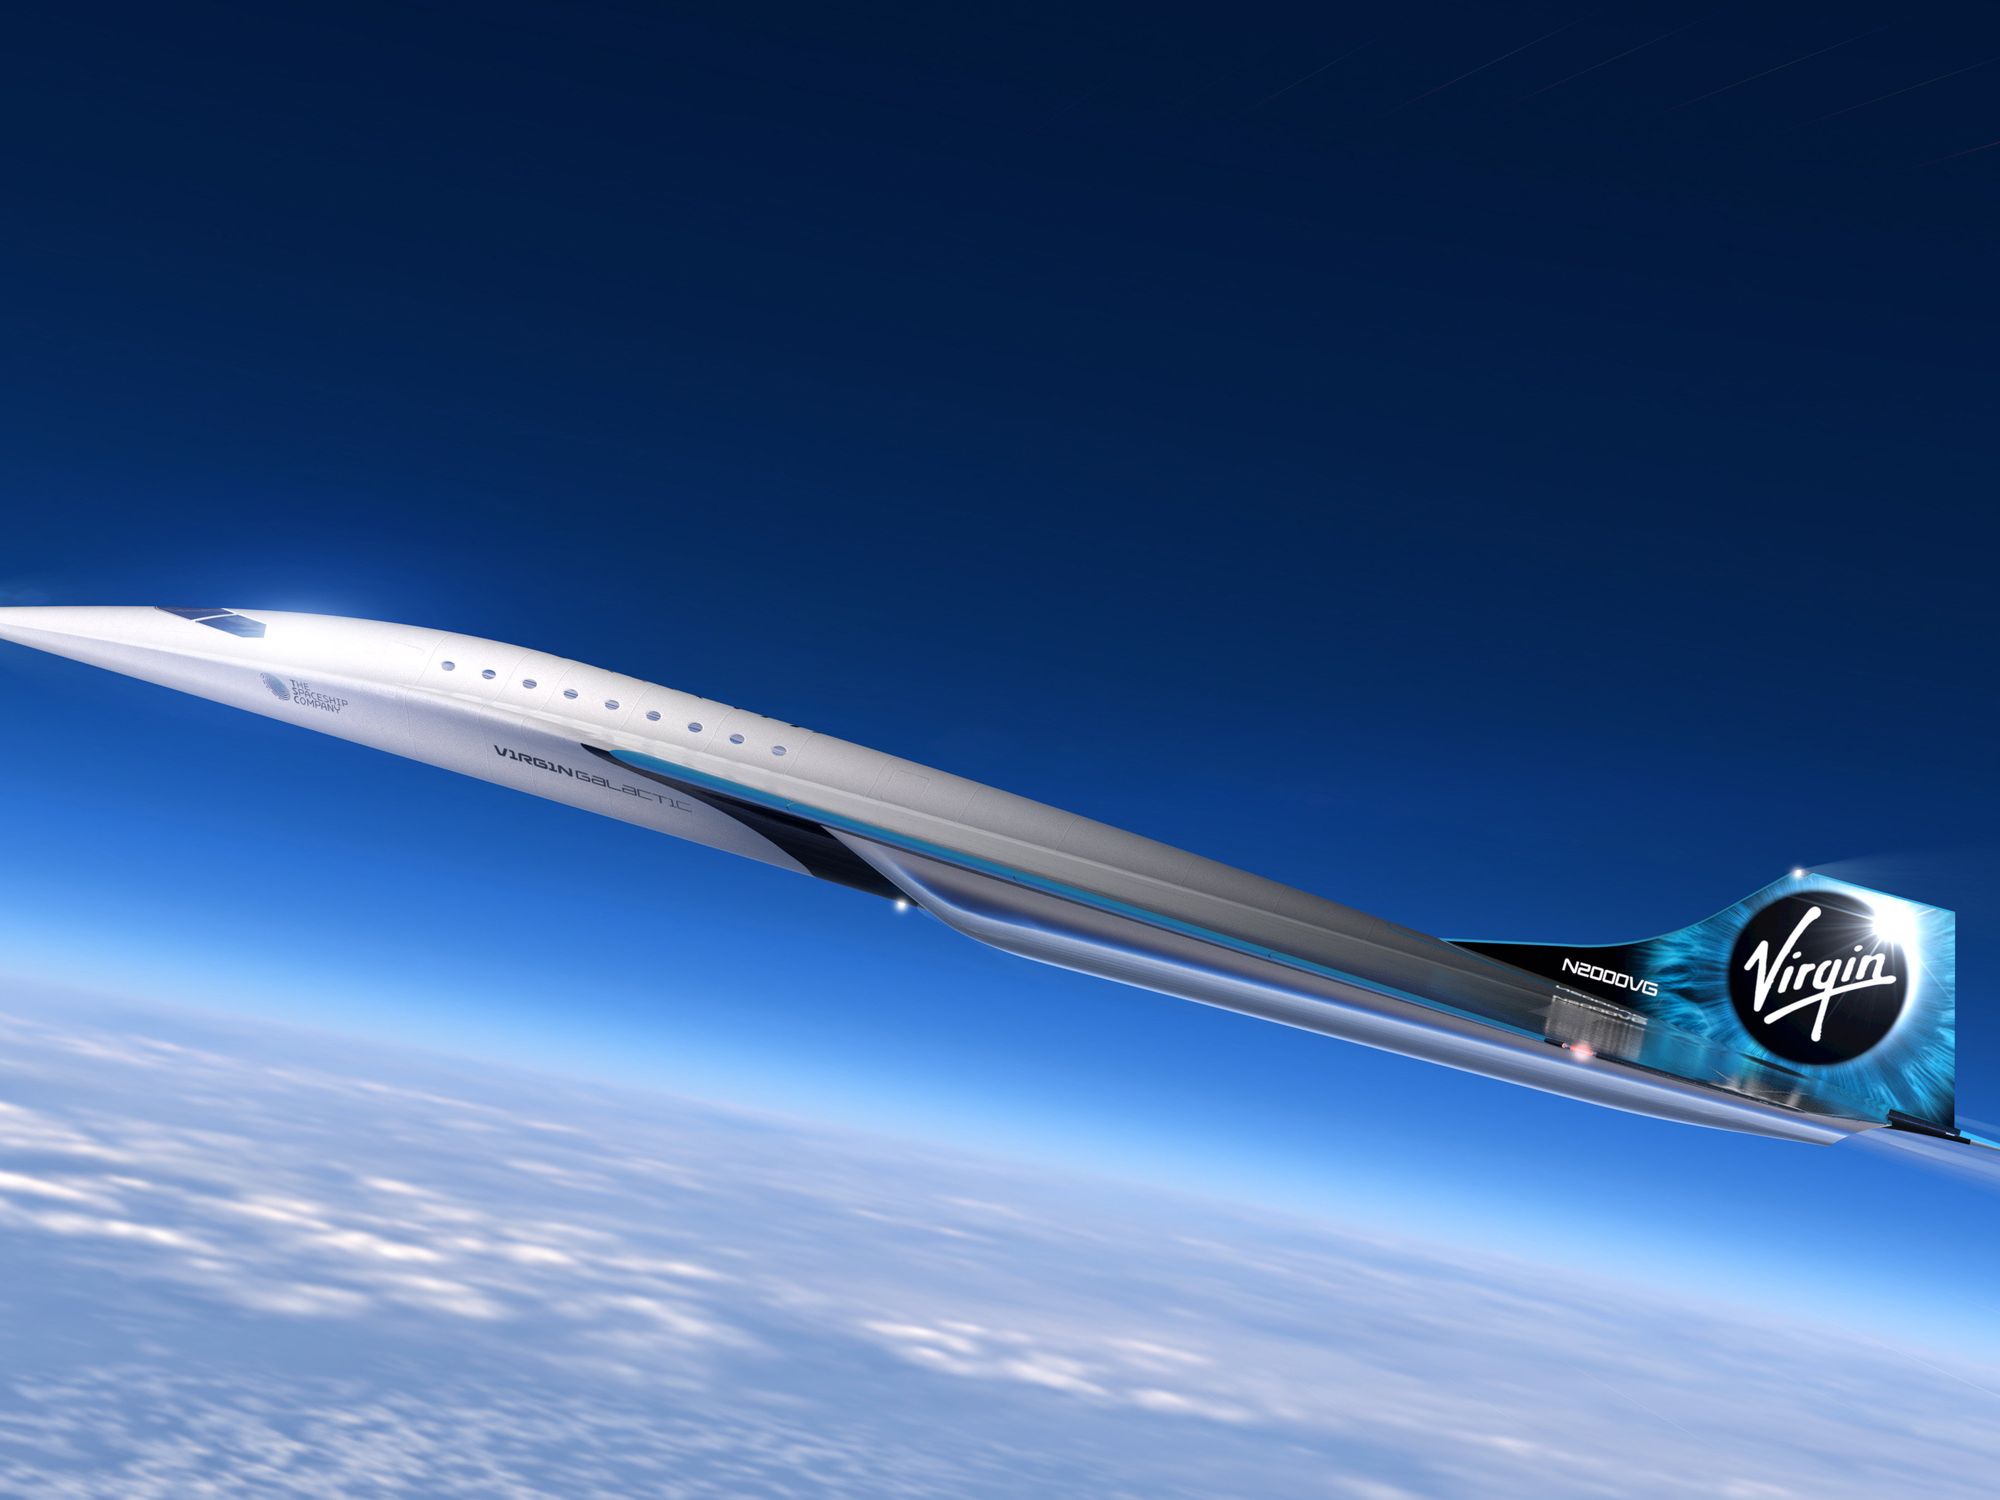 Virgin Galactic's Offers First Look at its Supersonic Airplane Concept